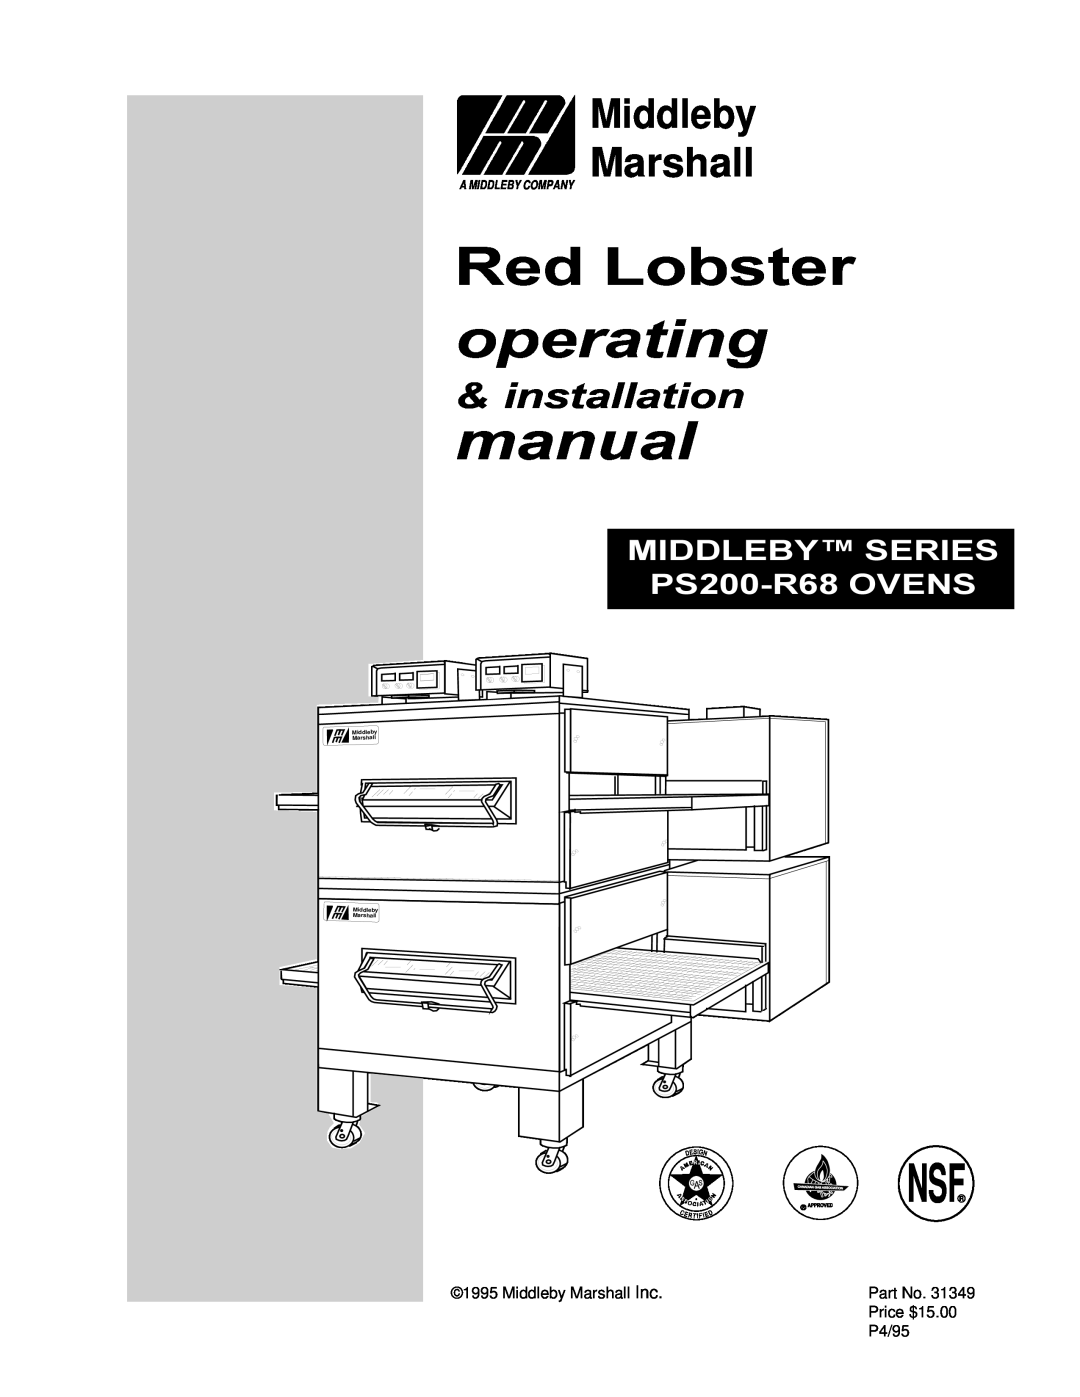 Middleby Marshall installation manual Middleby Marshall, Red Lobster operating, MIDDLEBY SERIES PS200-R68OVENS 